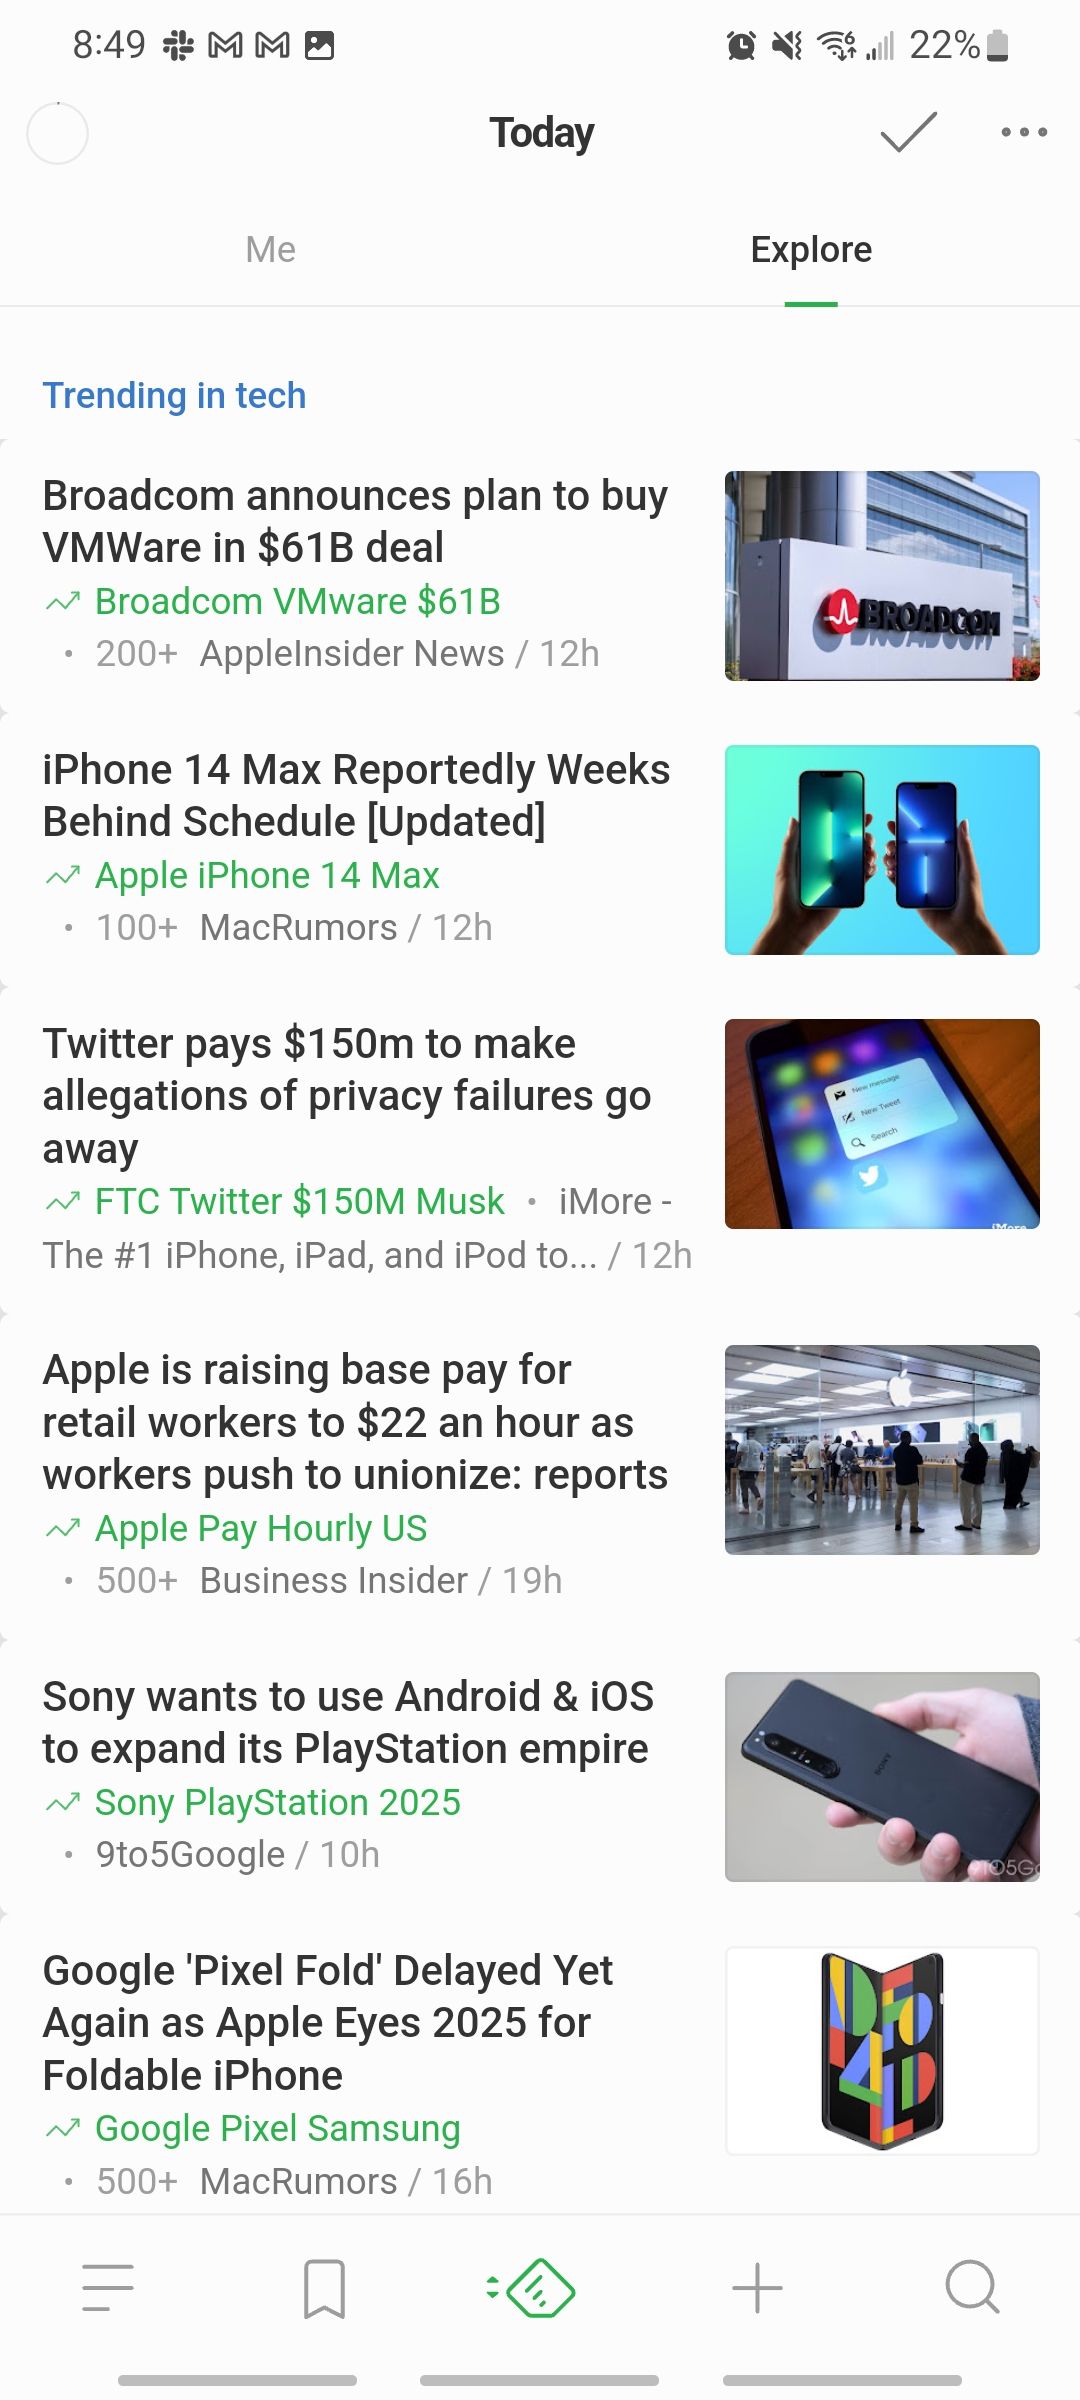 feedly app showing what is trending in the explore tab